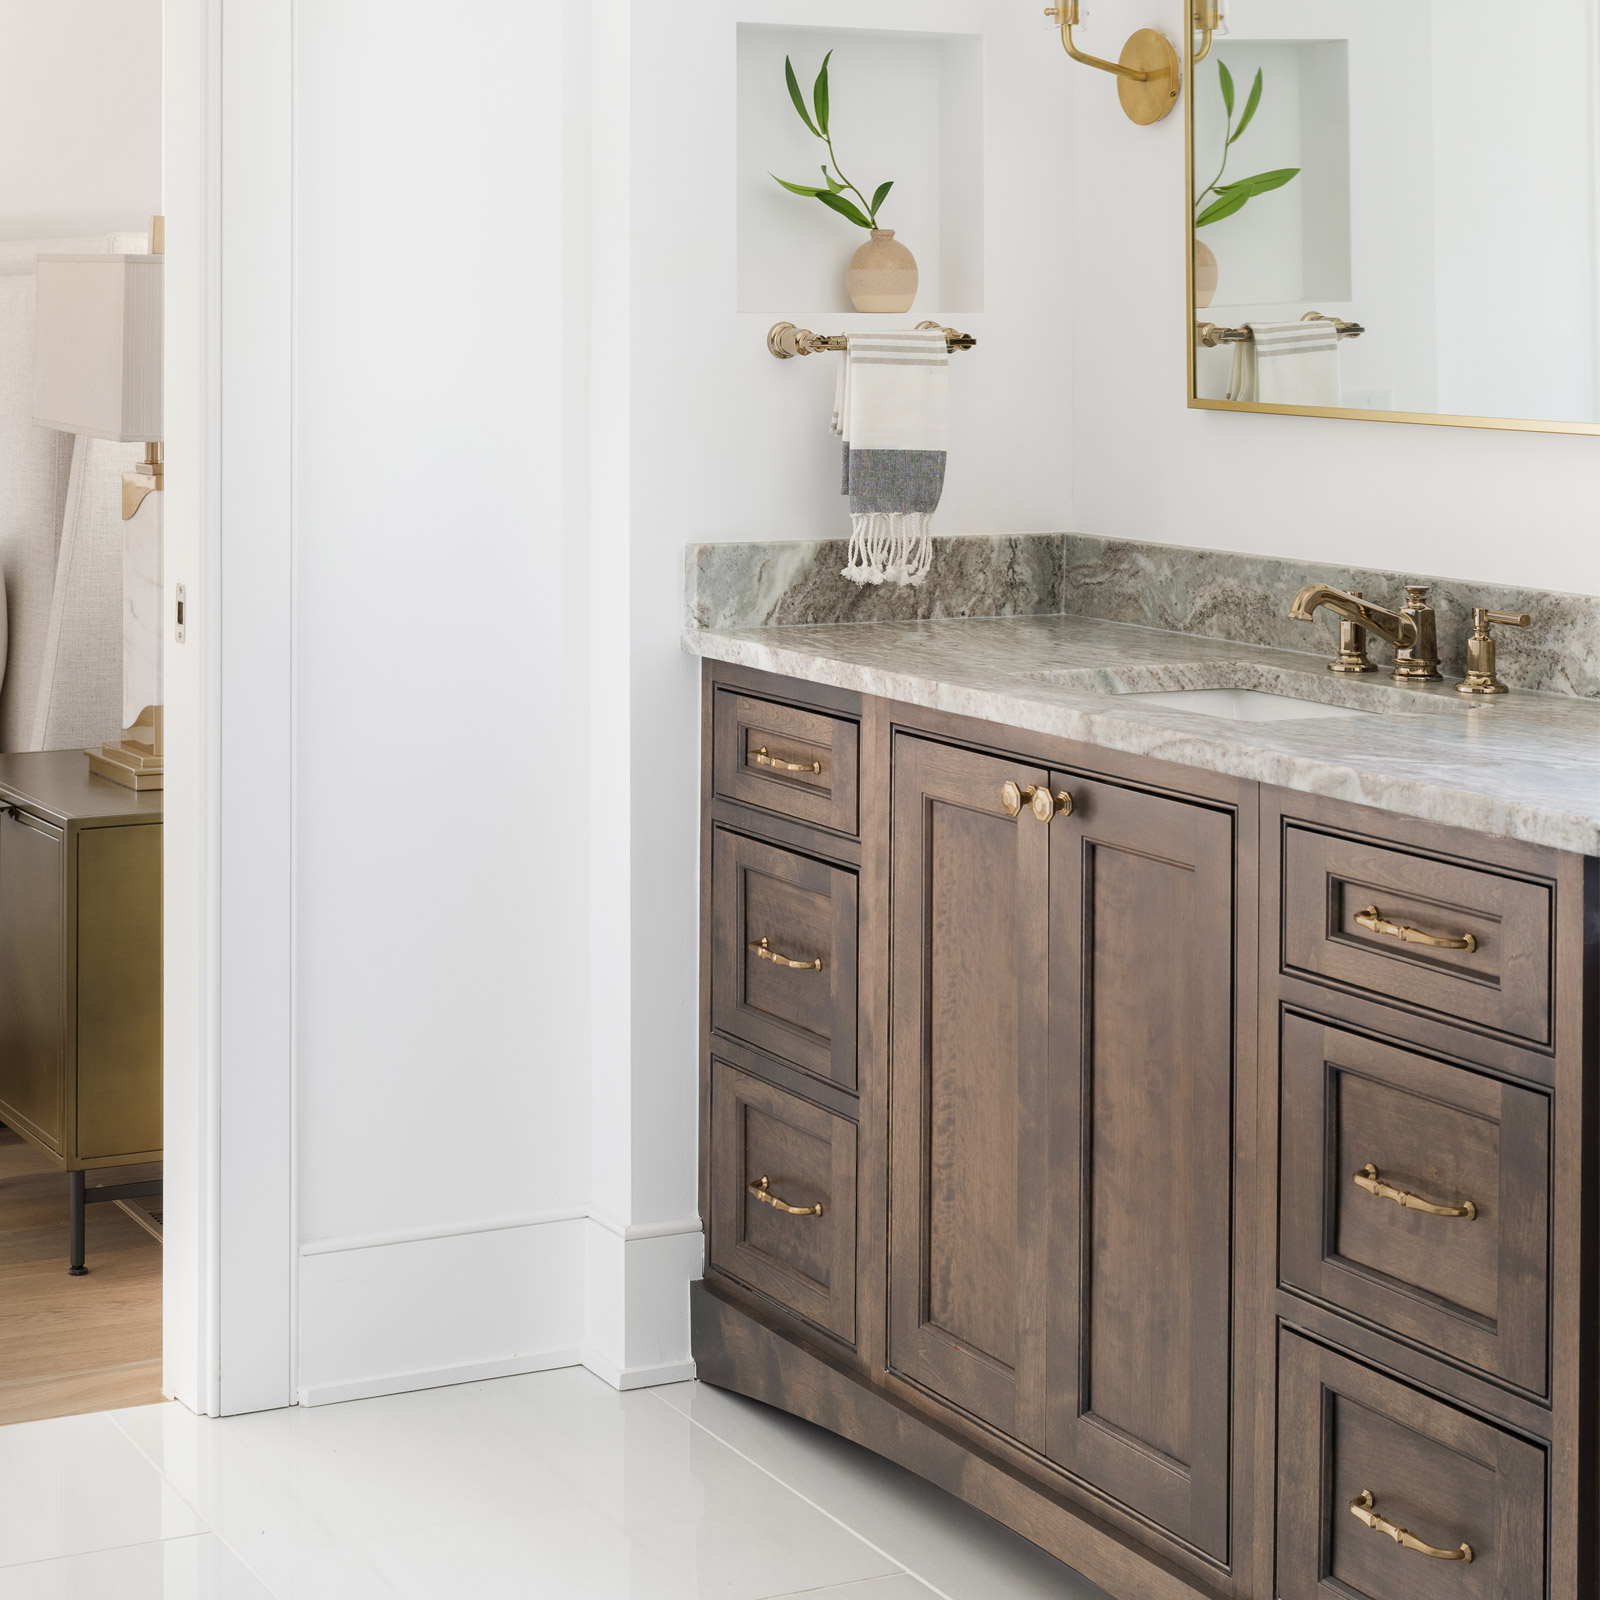 crafted birch vanity in our Edgewood Inset door style, using our Kitchen+ catalog